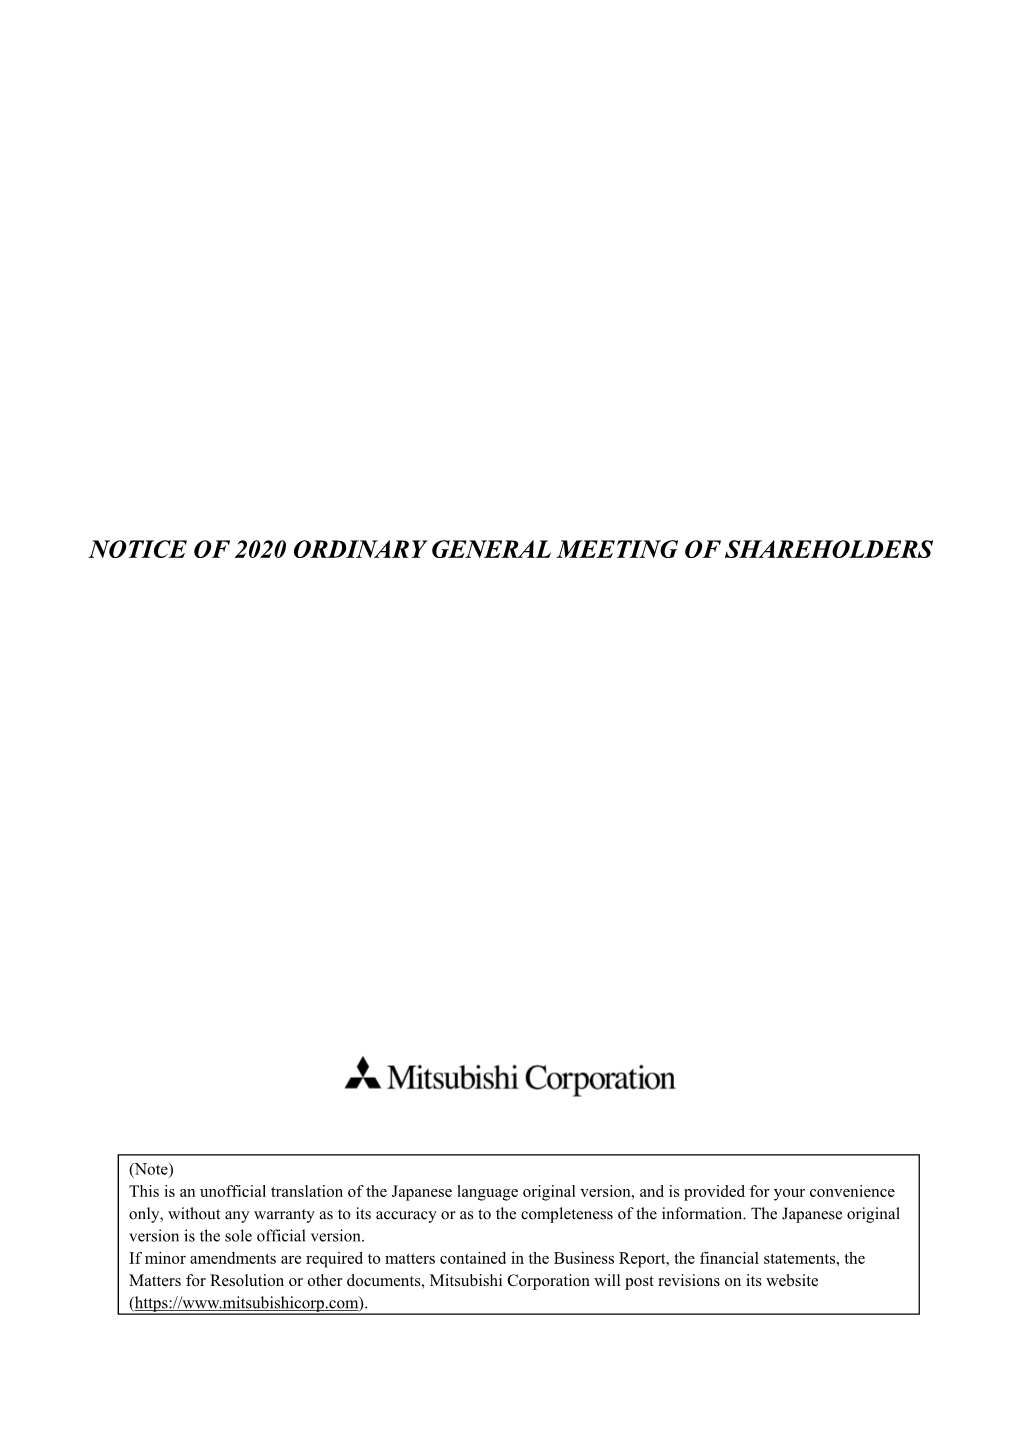 Notice of 2020 Ordinary General Meeting of Shareholders